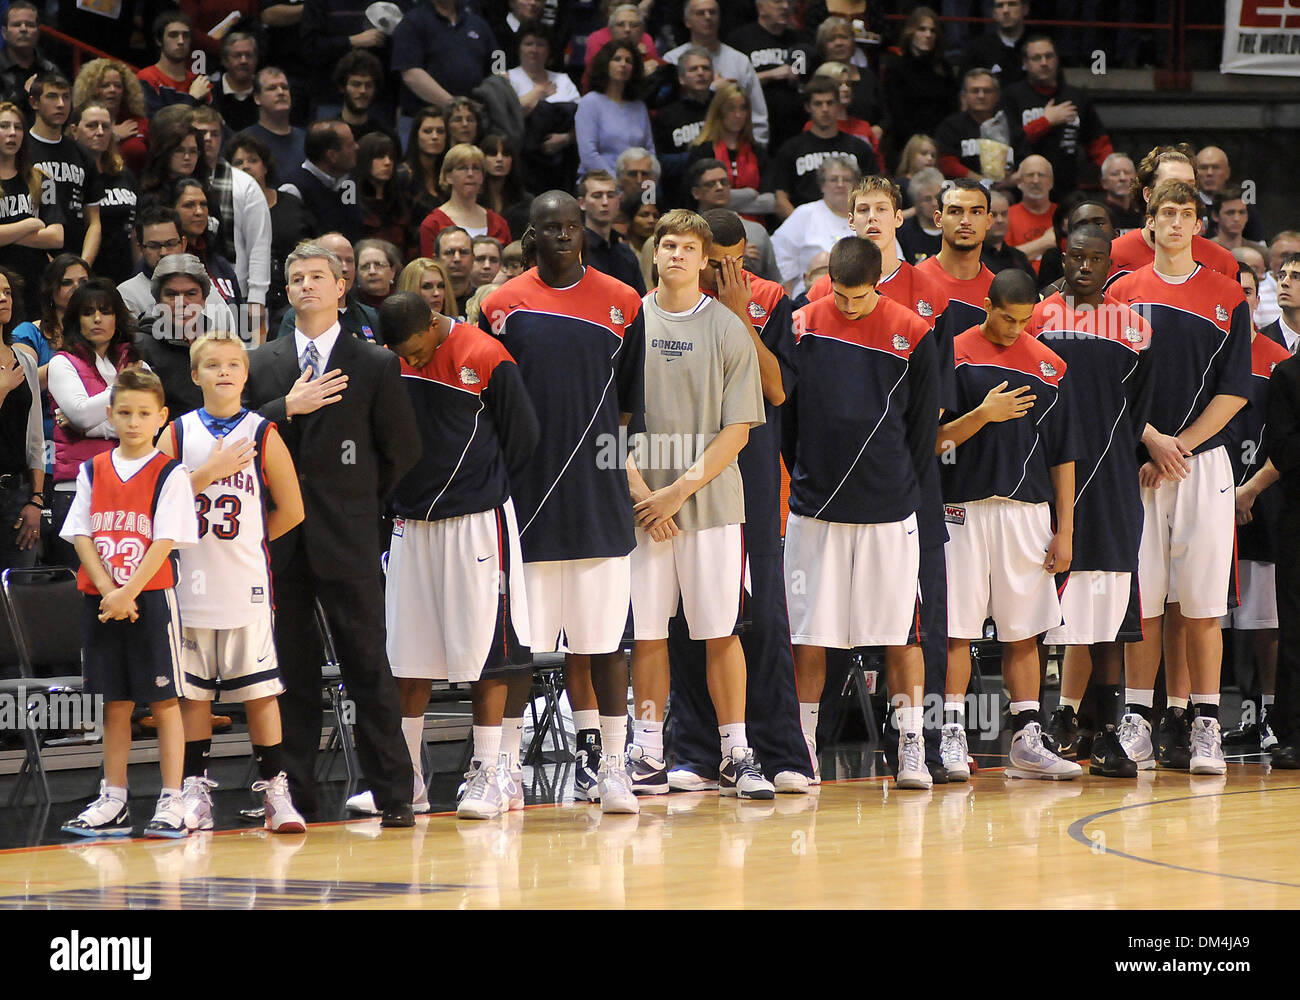 The Gonzaga basketball team stand for the United State National Anthem  during a NCAA college basketball game against Oklahoma held at the Spokane  Arena in Spokane WA. This was the 4th annual